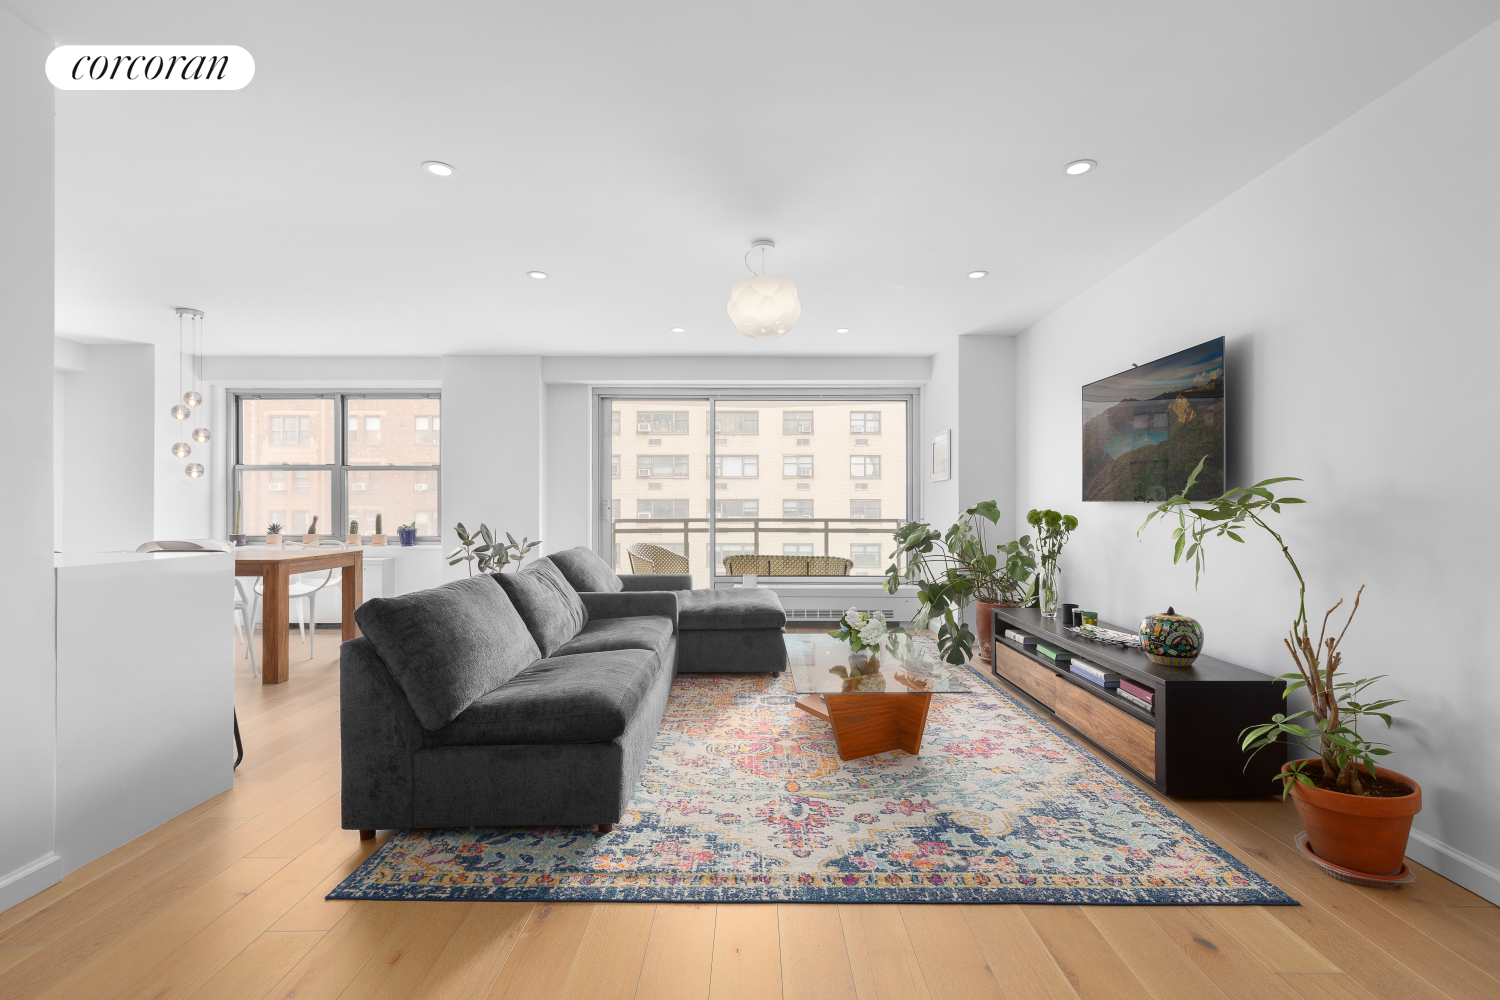 400 East 56th Street 5B, Sutton, Midtown East, NYC - 2 Bedrooms  
2 Bathrooms  
5 Rooms - 